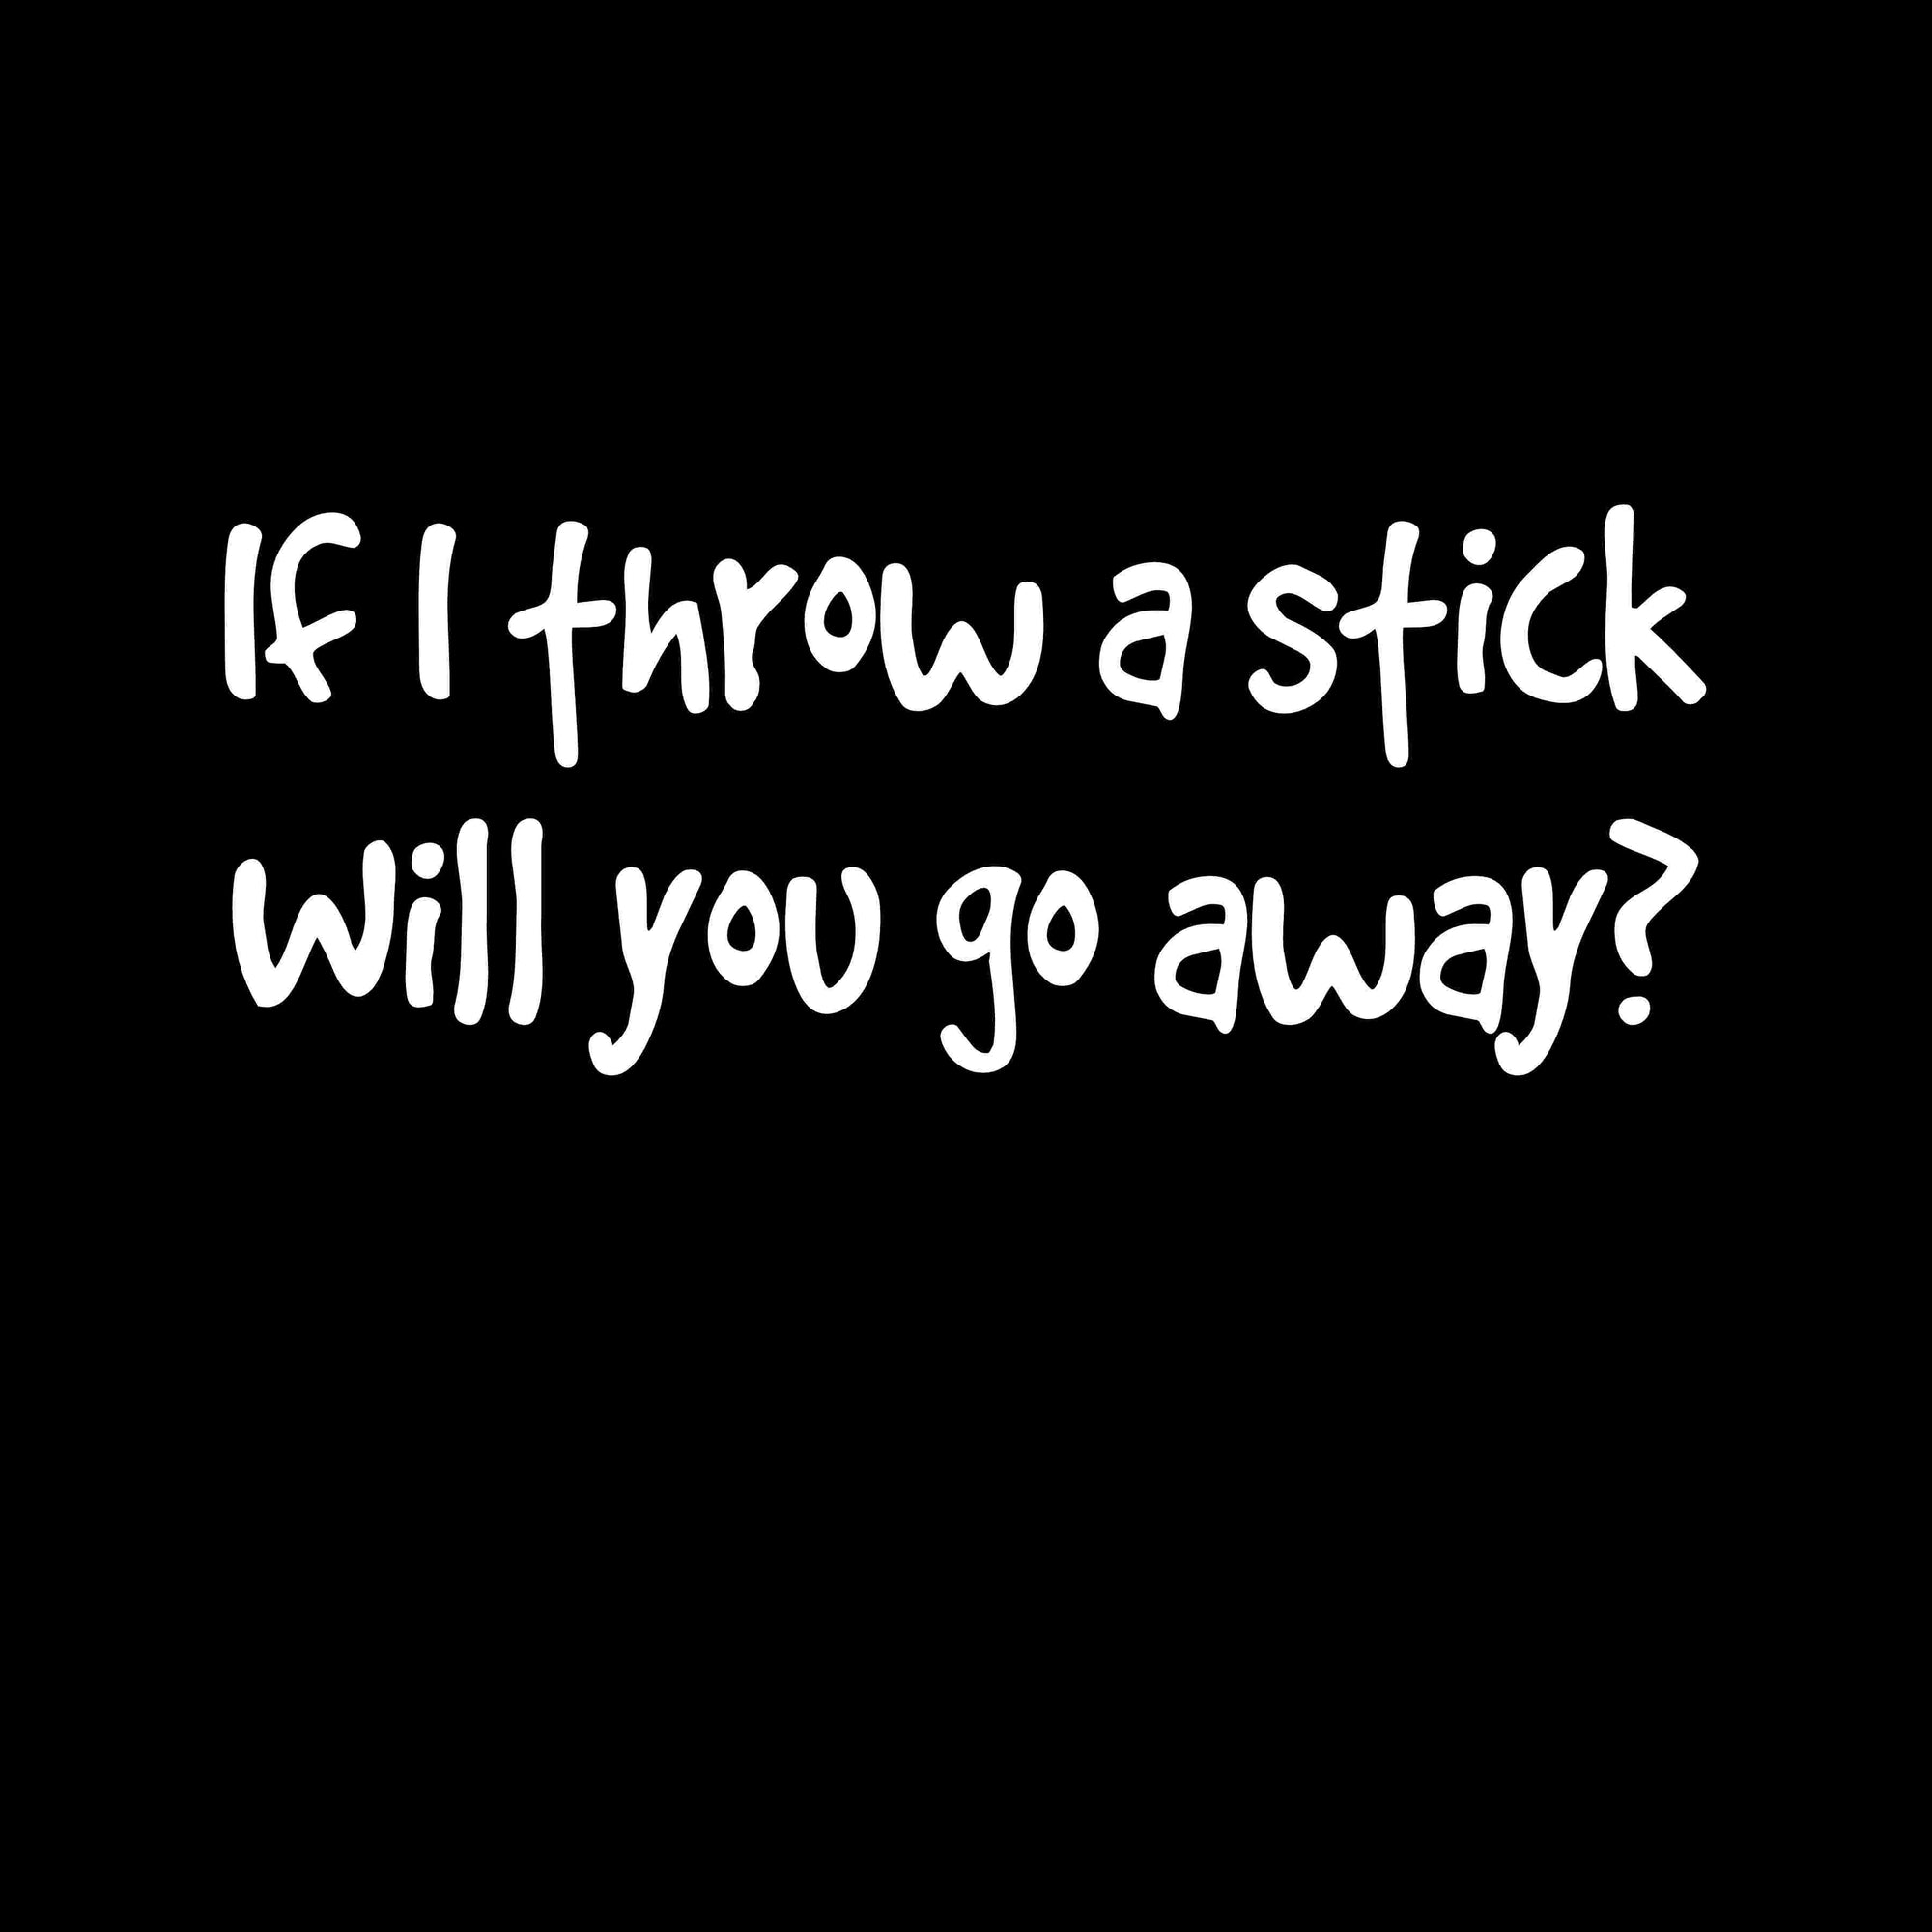 If I throw a stick will you go away Printed T-Shirt-Black